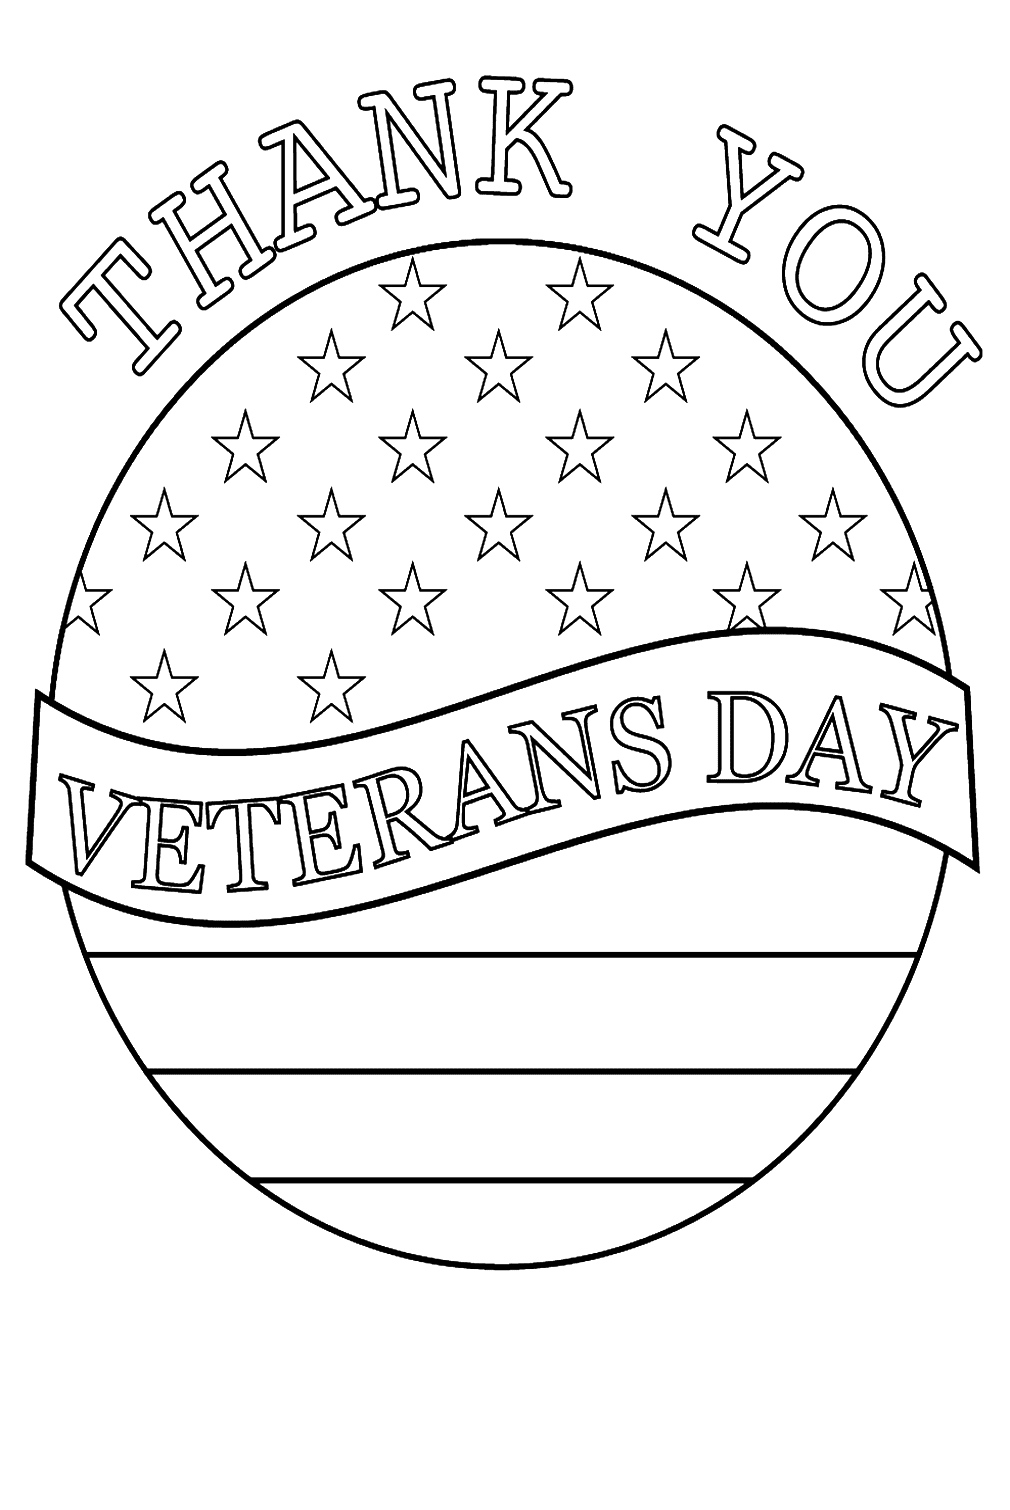 Thanking our Veterans Coloring Pages